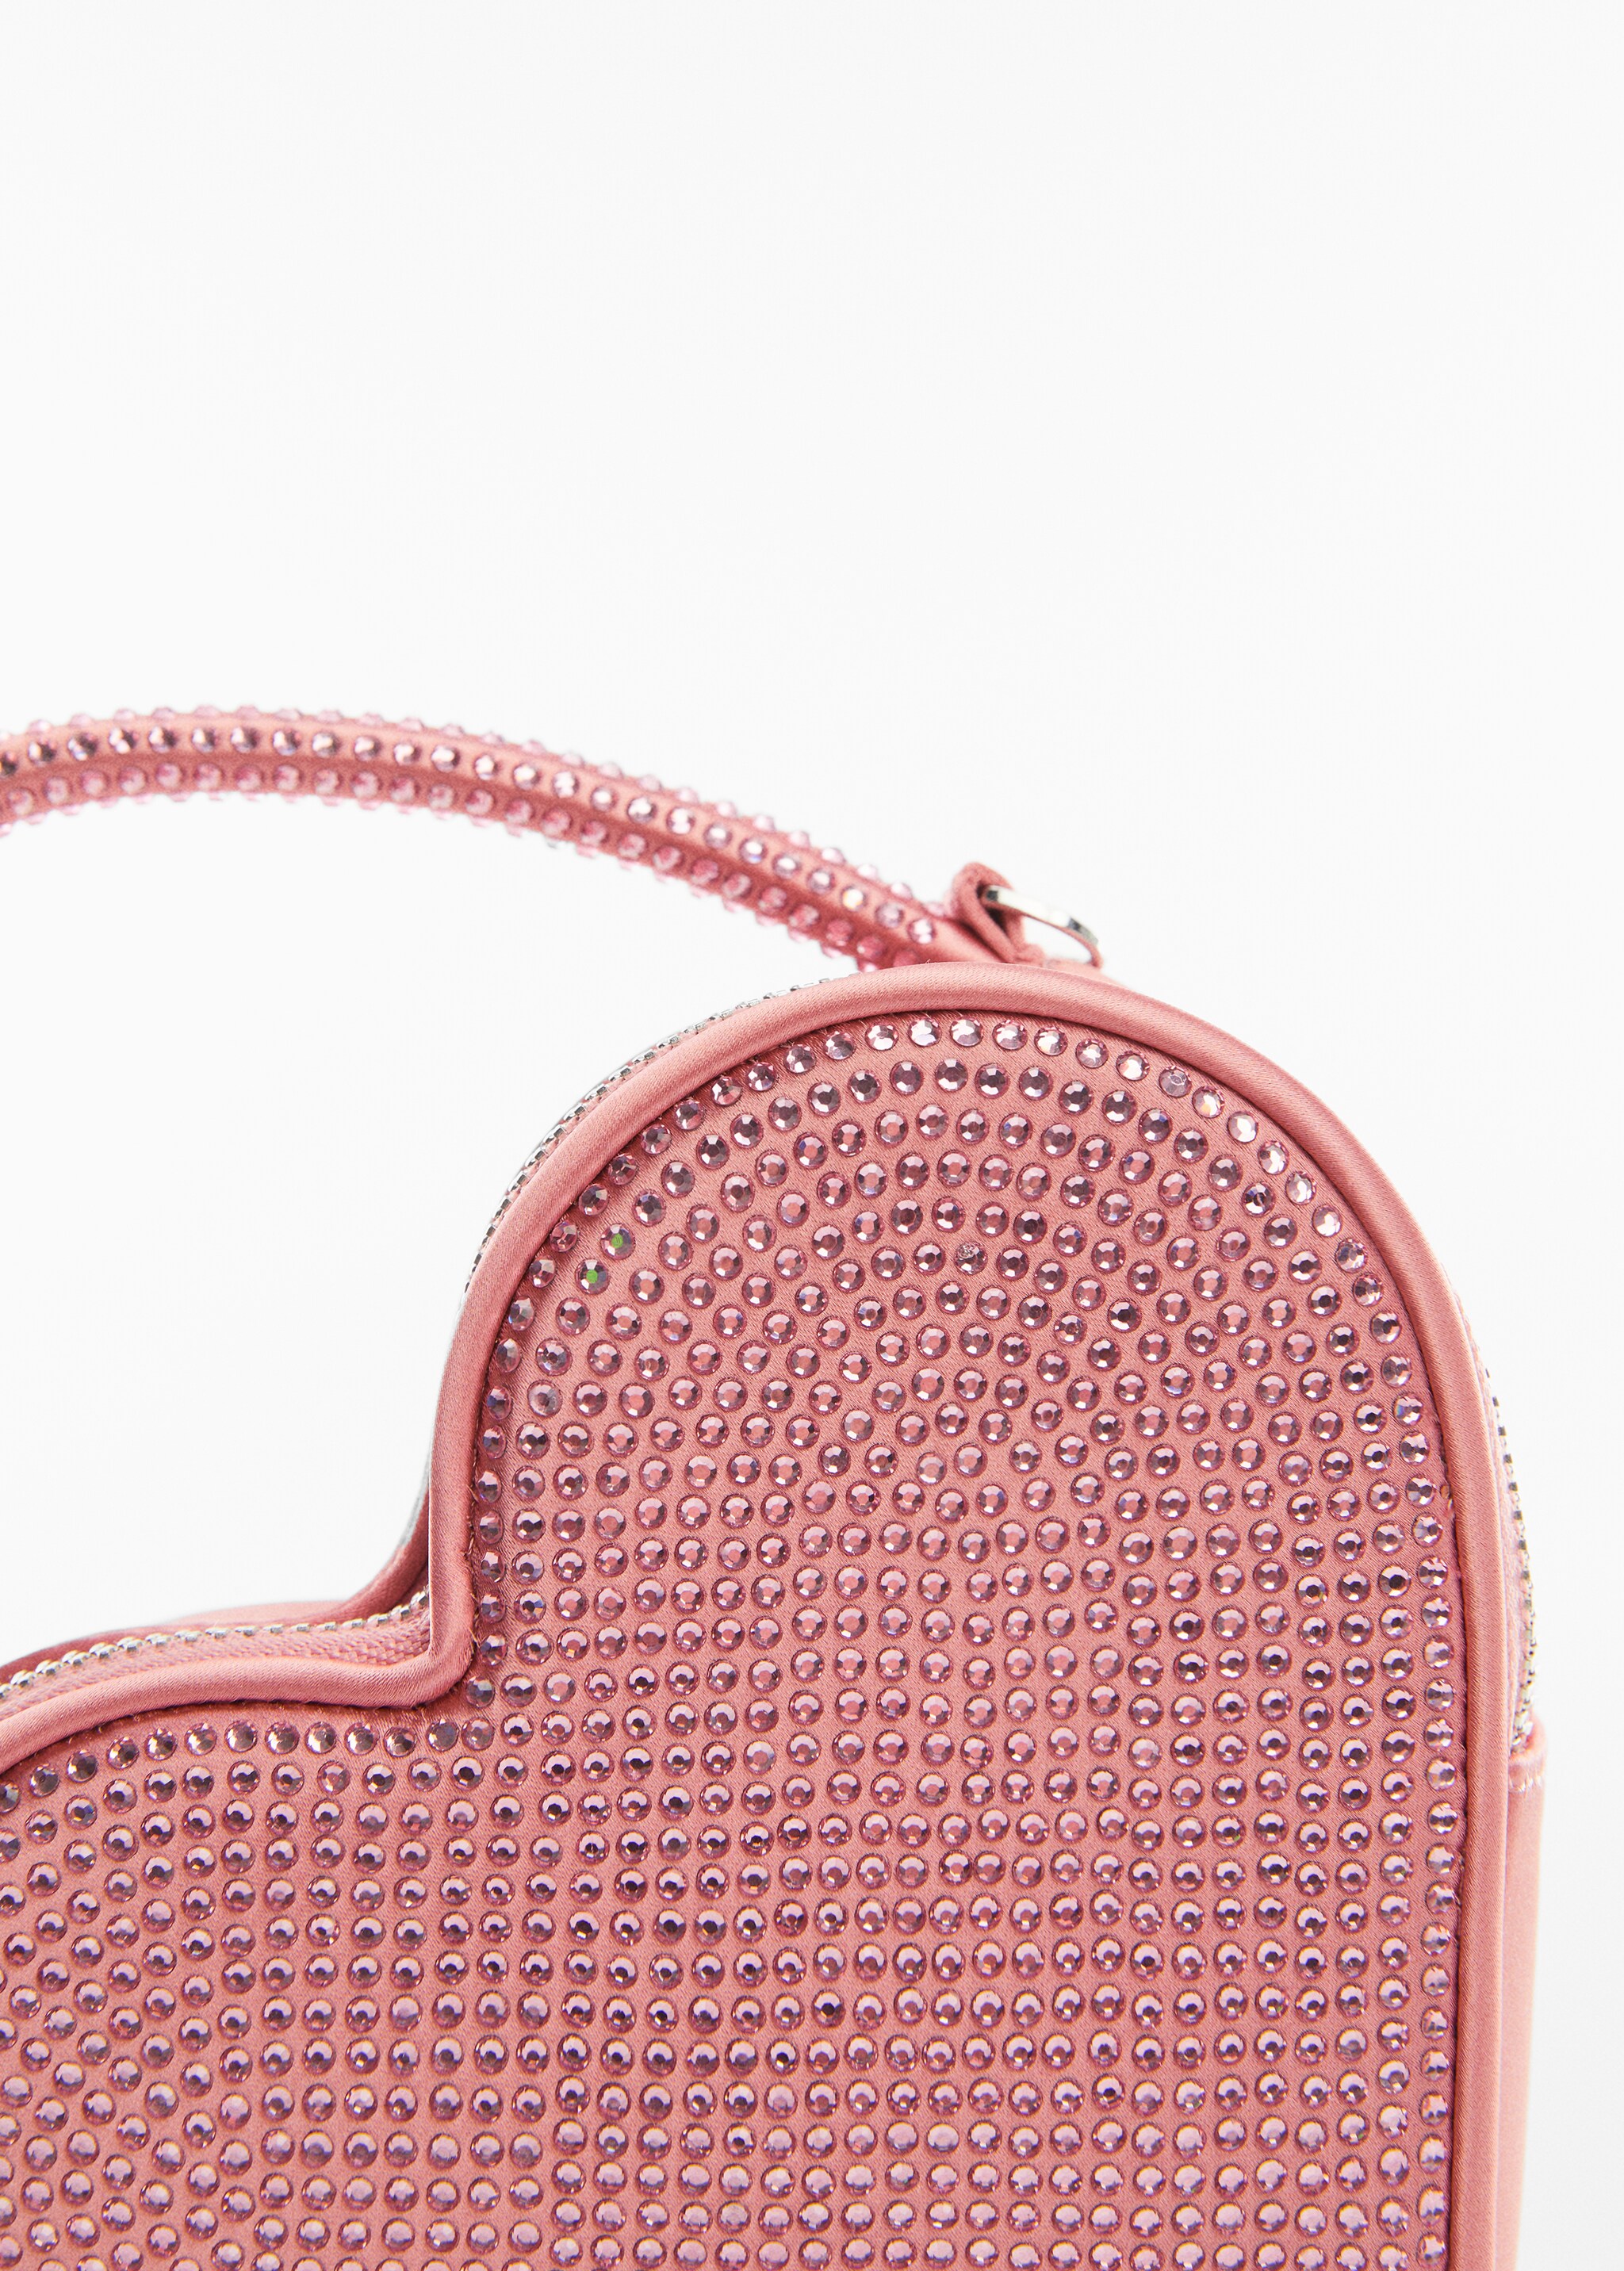 Crystal heart bag - Details of the article 1